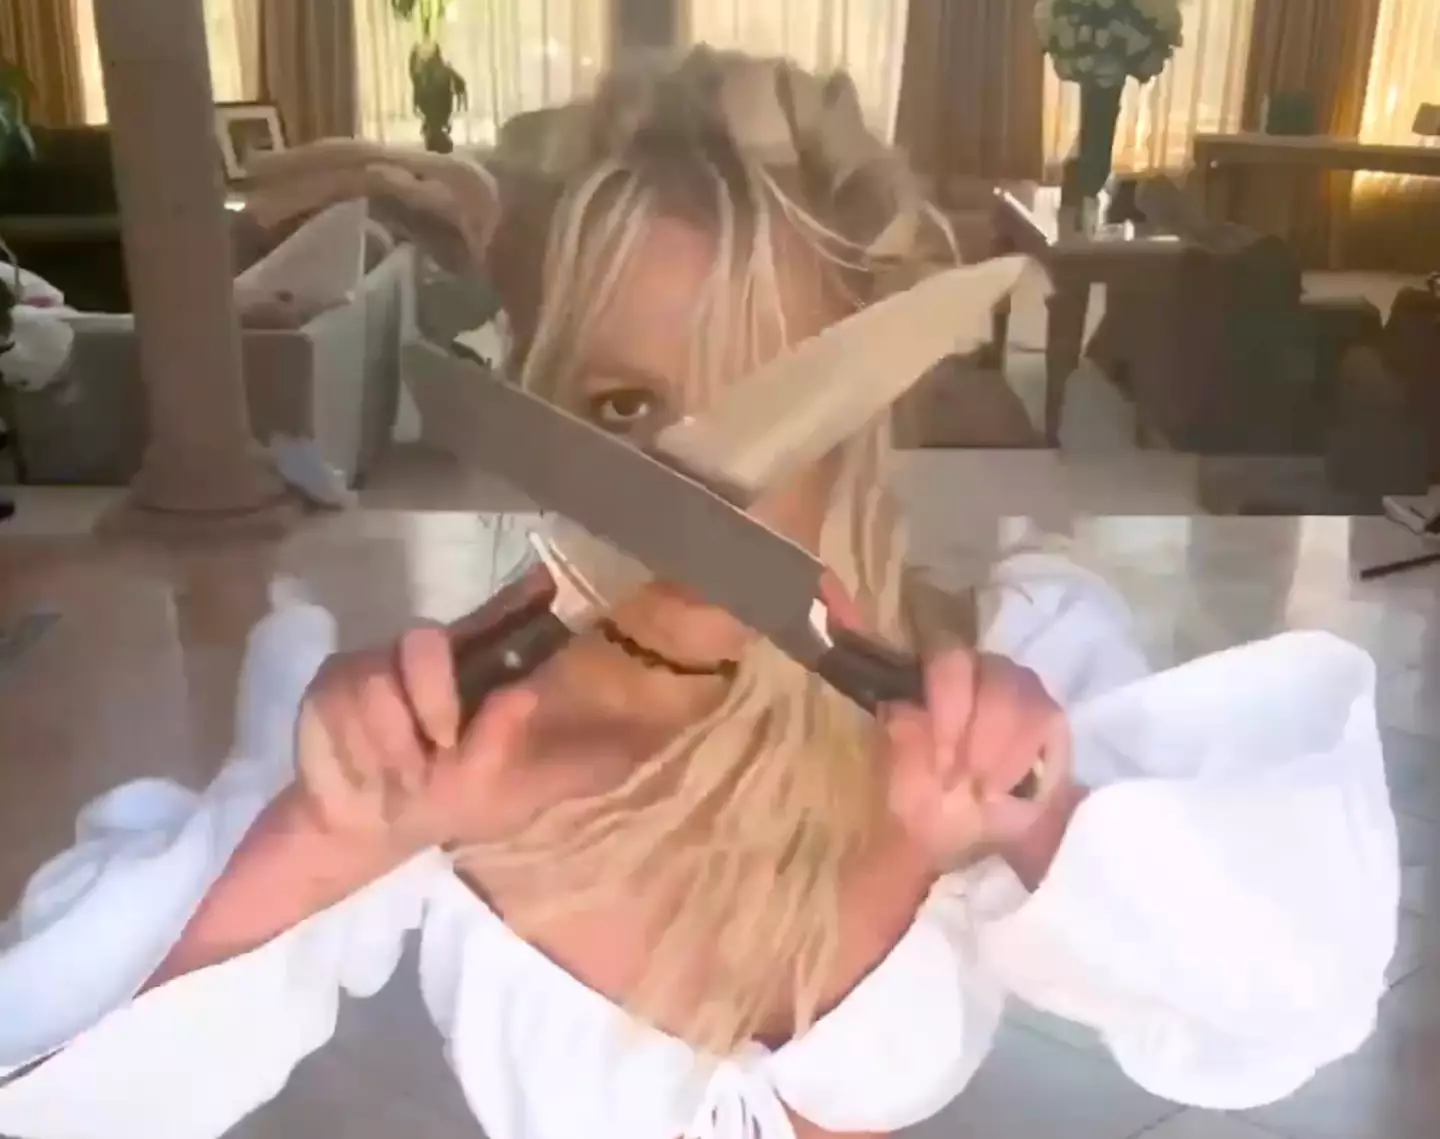 Britney Spears claimed the knives were 'fake'.